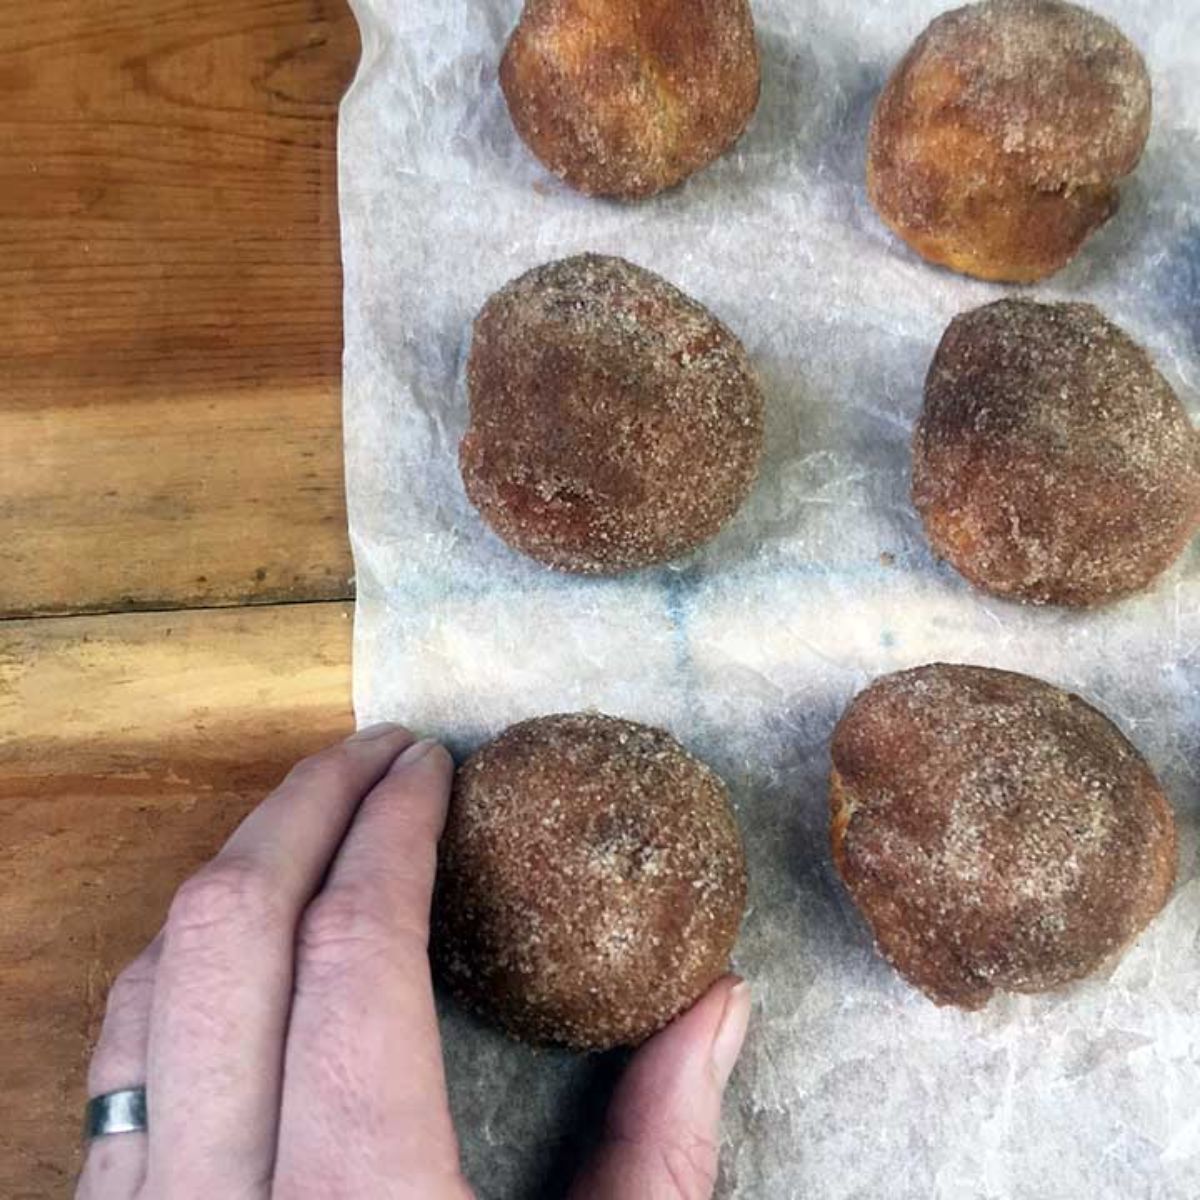 On a baking parchment are 6 donut holes with a hand holding the botto left one